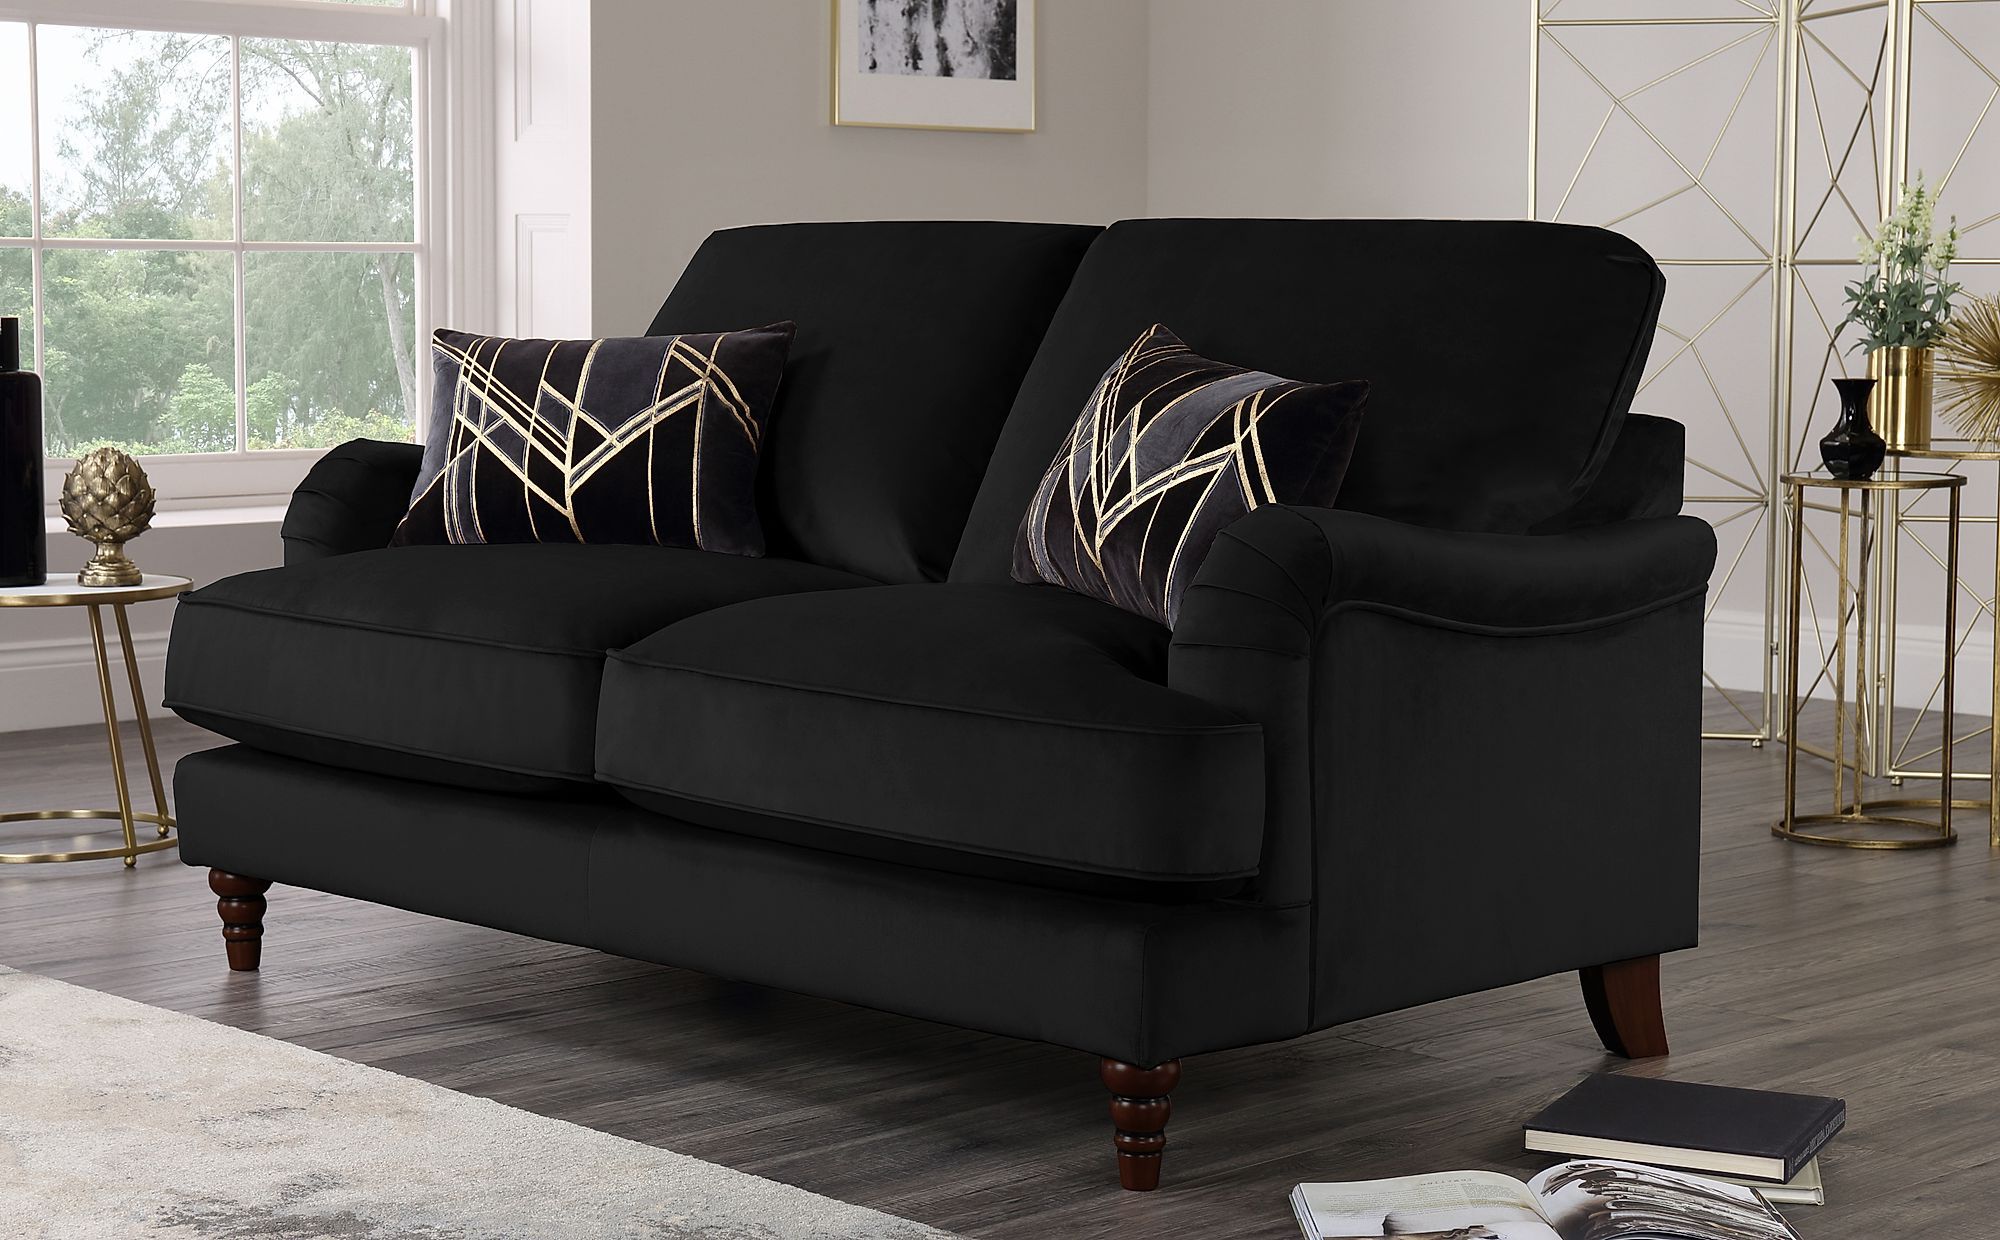 Featured Photo of 15 The Best 2 Seater Black Velvet Sofa Beds